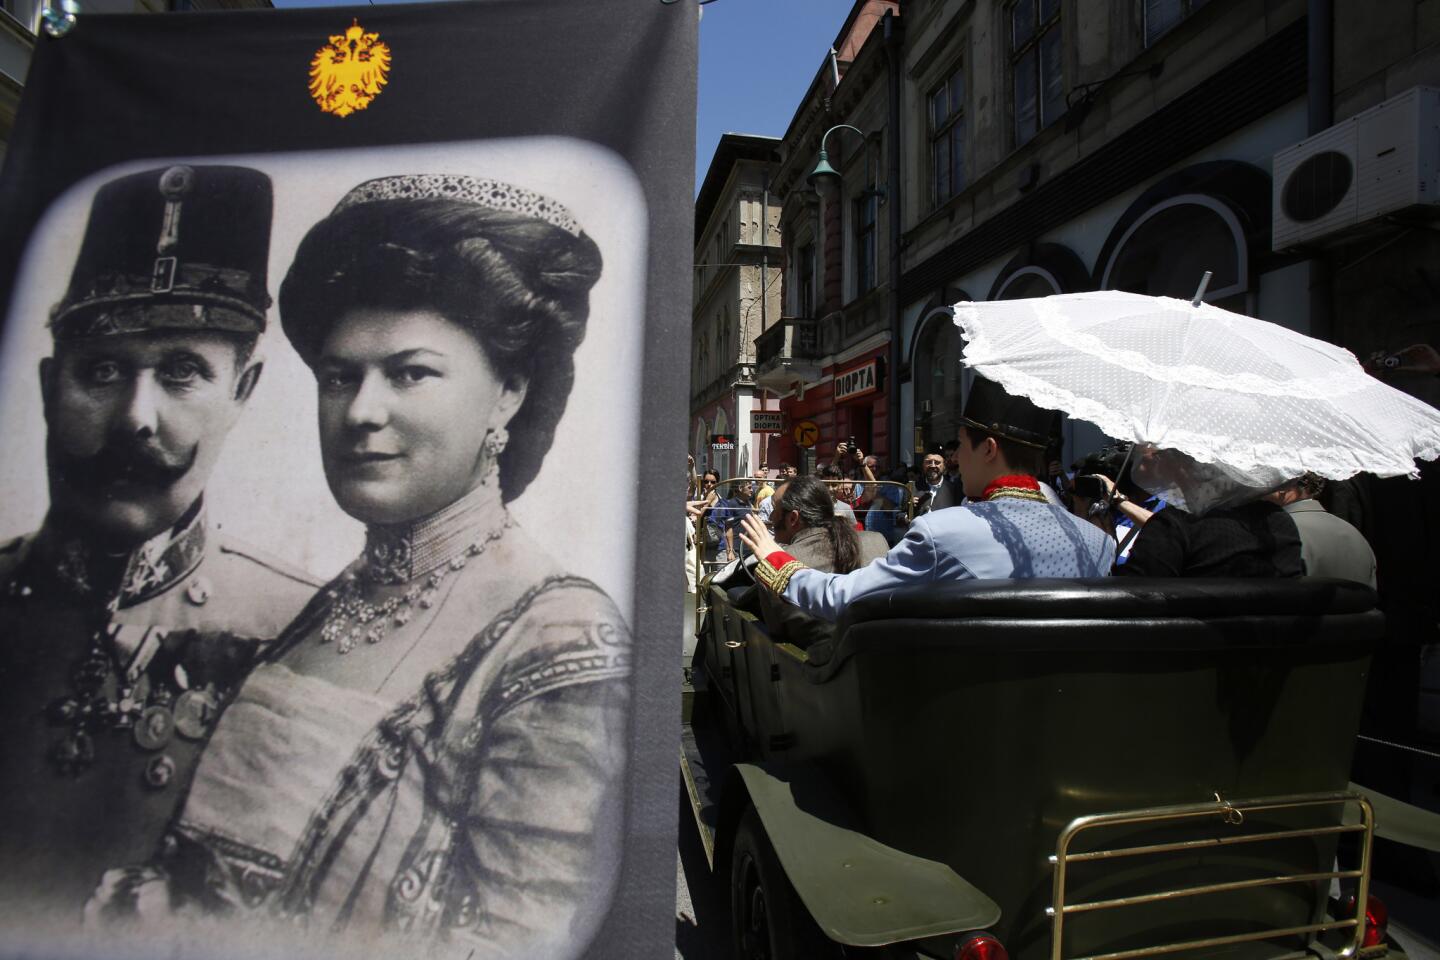 Tourists in Sarajevo pose for photographs inside a replica of the car in which Archduke Franz Ferdinand of Austria and his wife, Sophie, were assassinated on June 28, 2014.